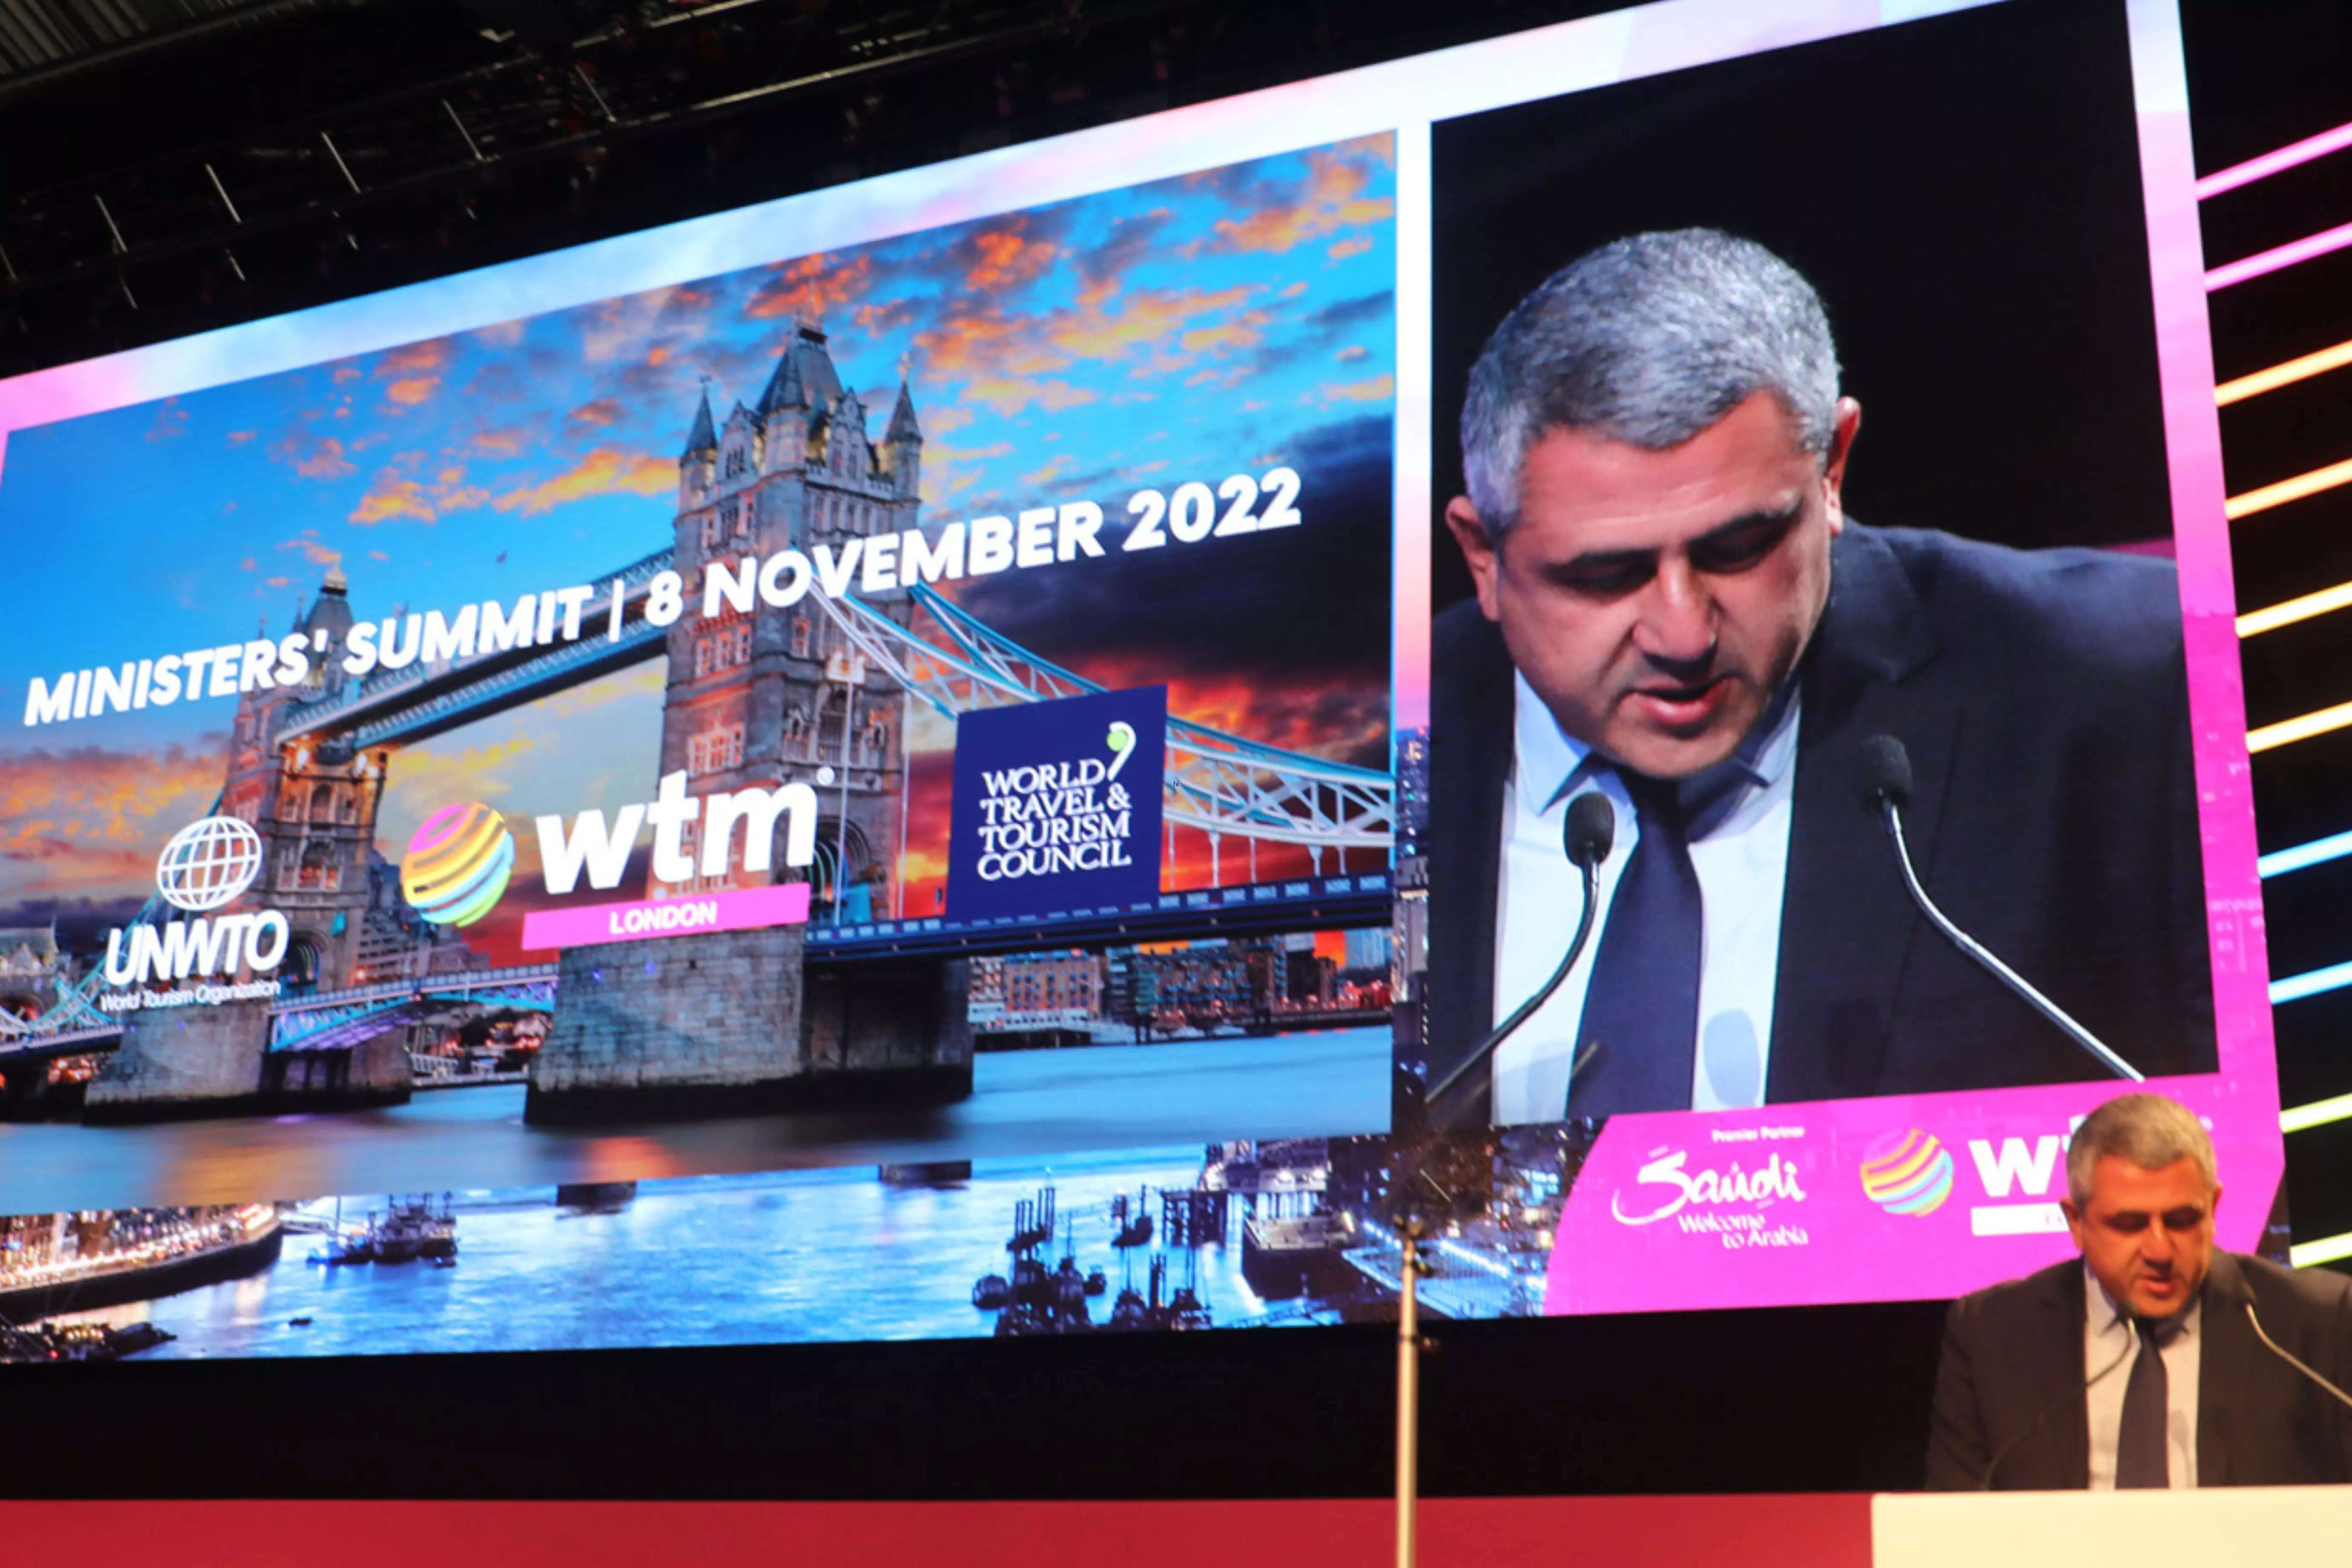 UNWTO Ministers’ Summit deliberates on education, jobs, sustainability to get tourism industry back on track